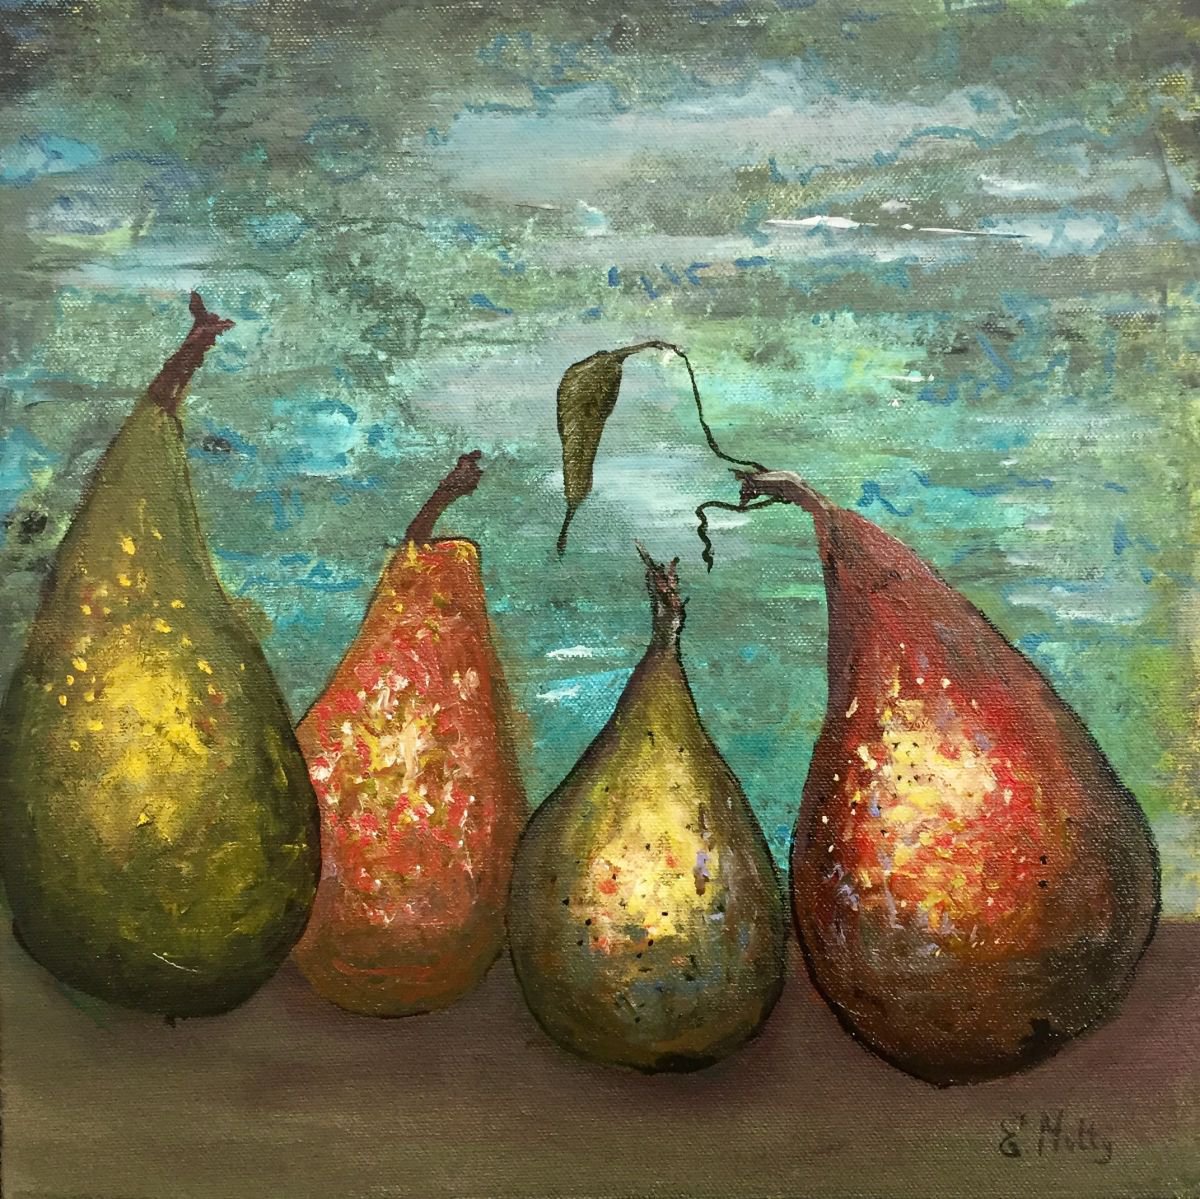 The 4 pears by Elisabetta Mutty